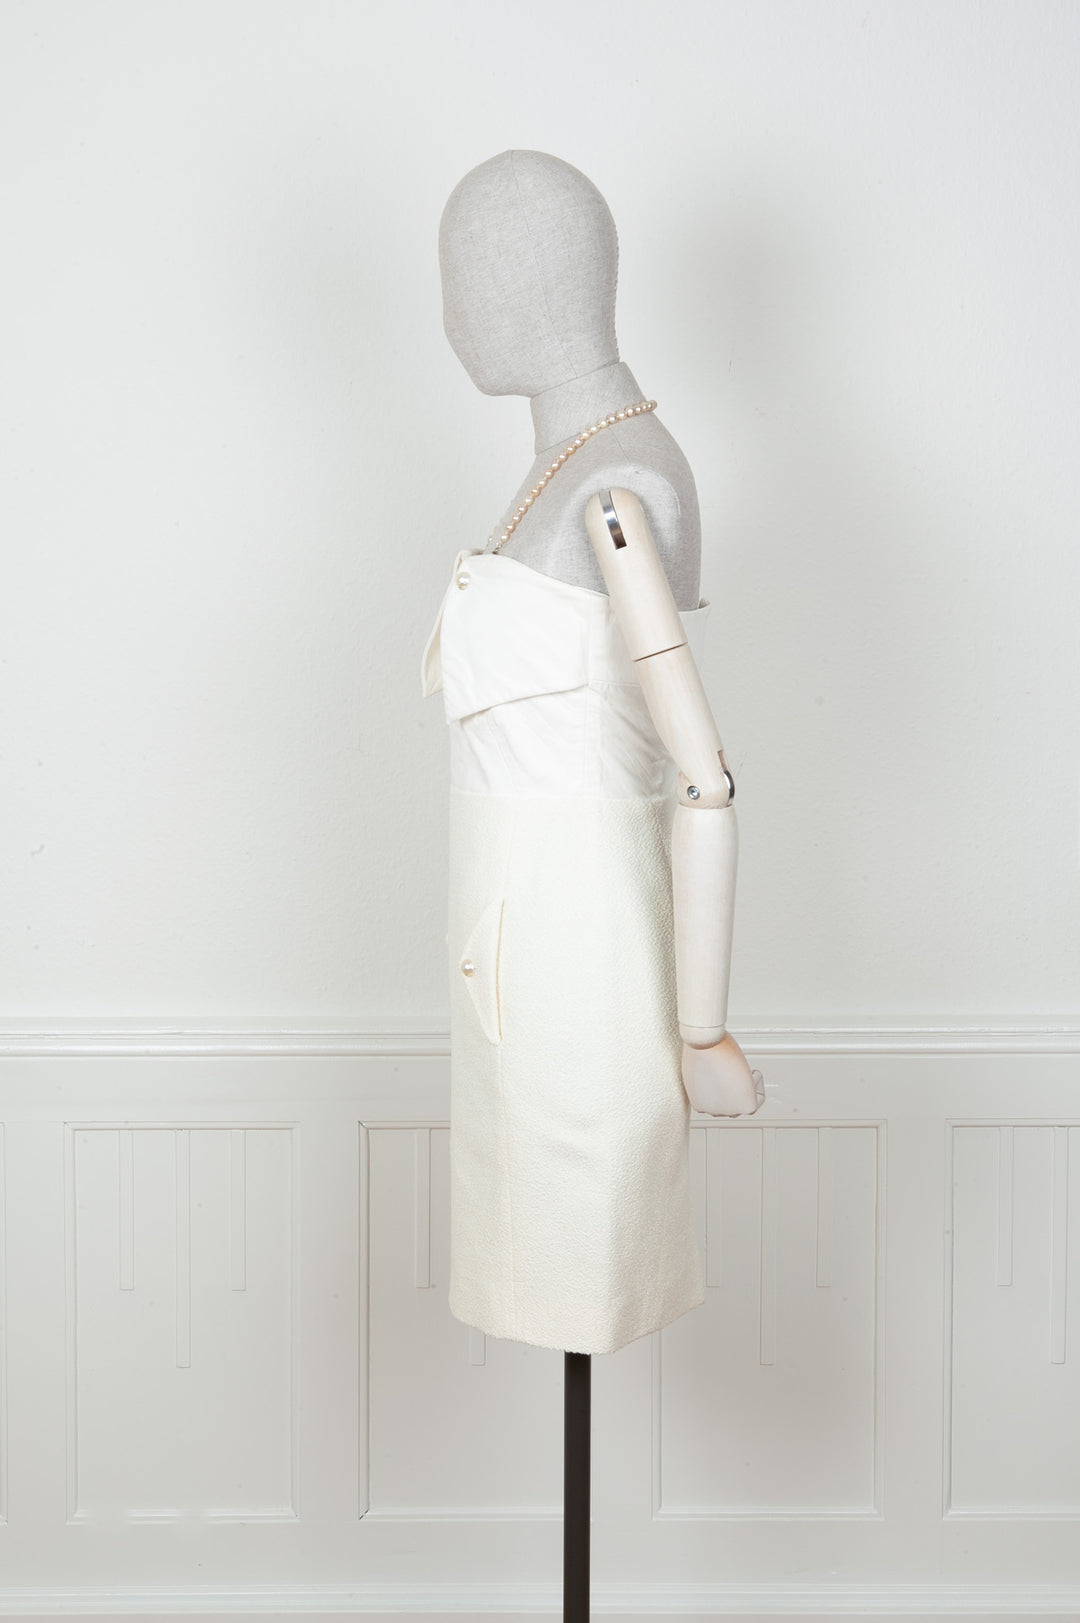 CHANEL Dress White Leather Top Spring 2012